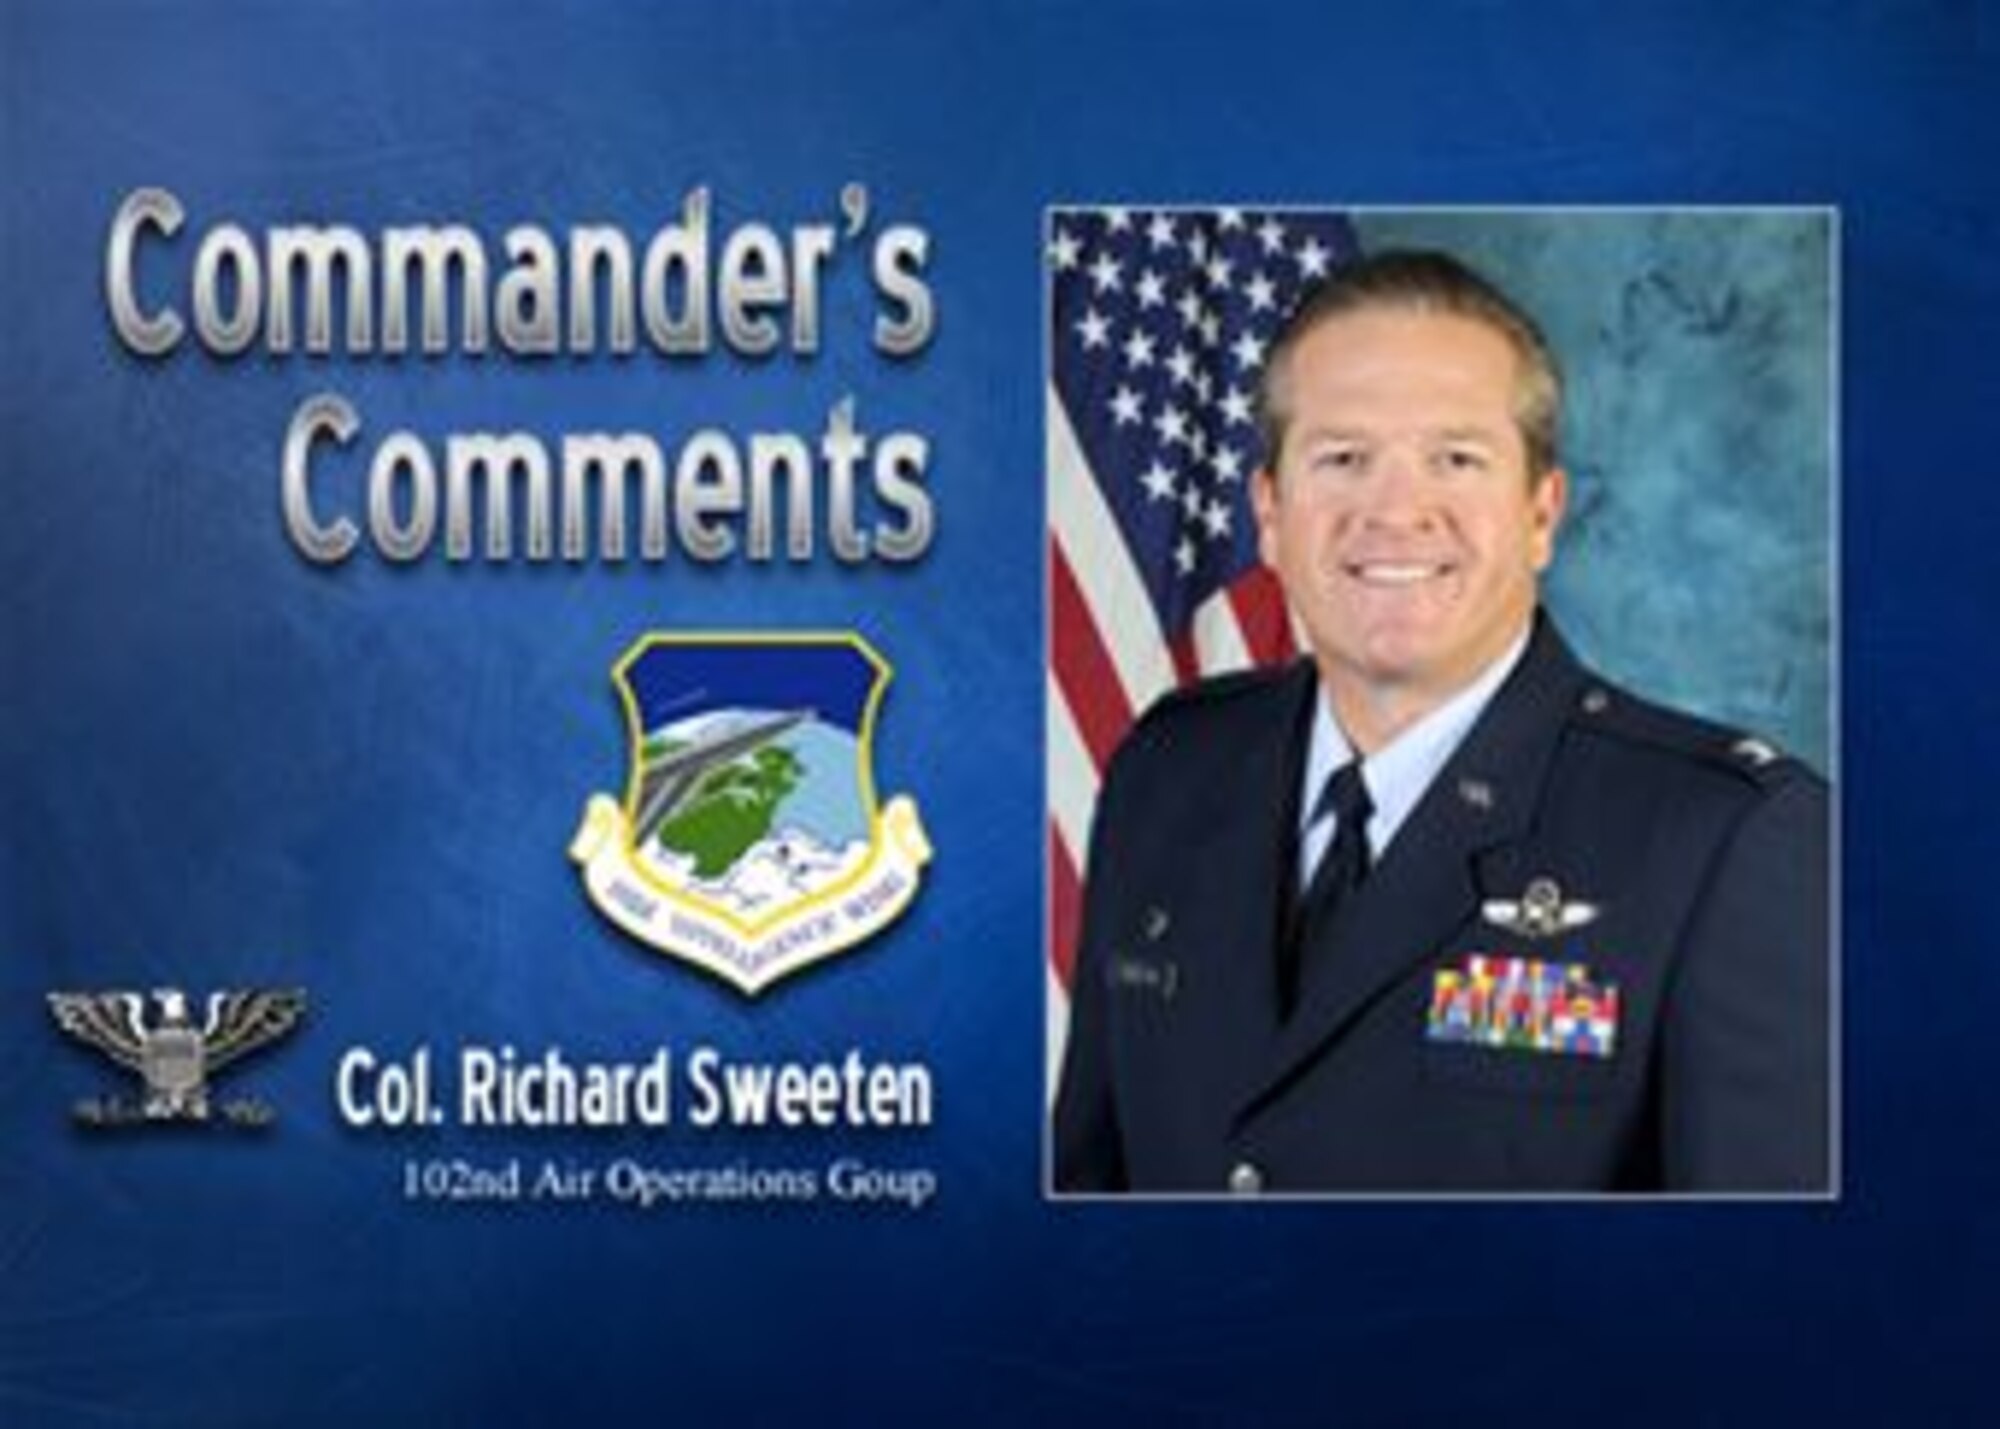 Col. Richard Sweeten
102nd Air Operations Group Commander